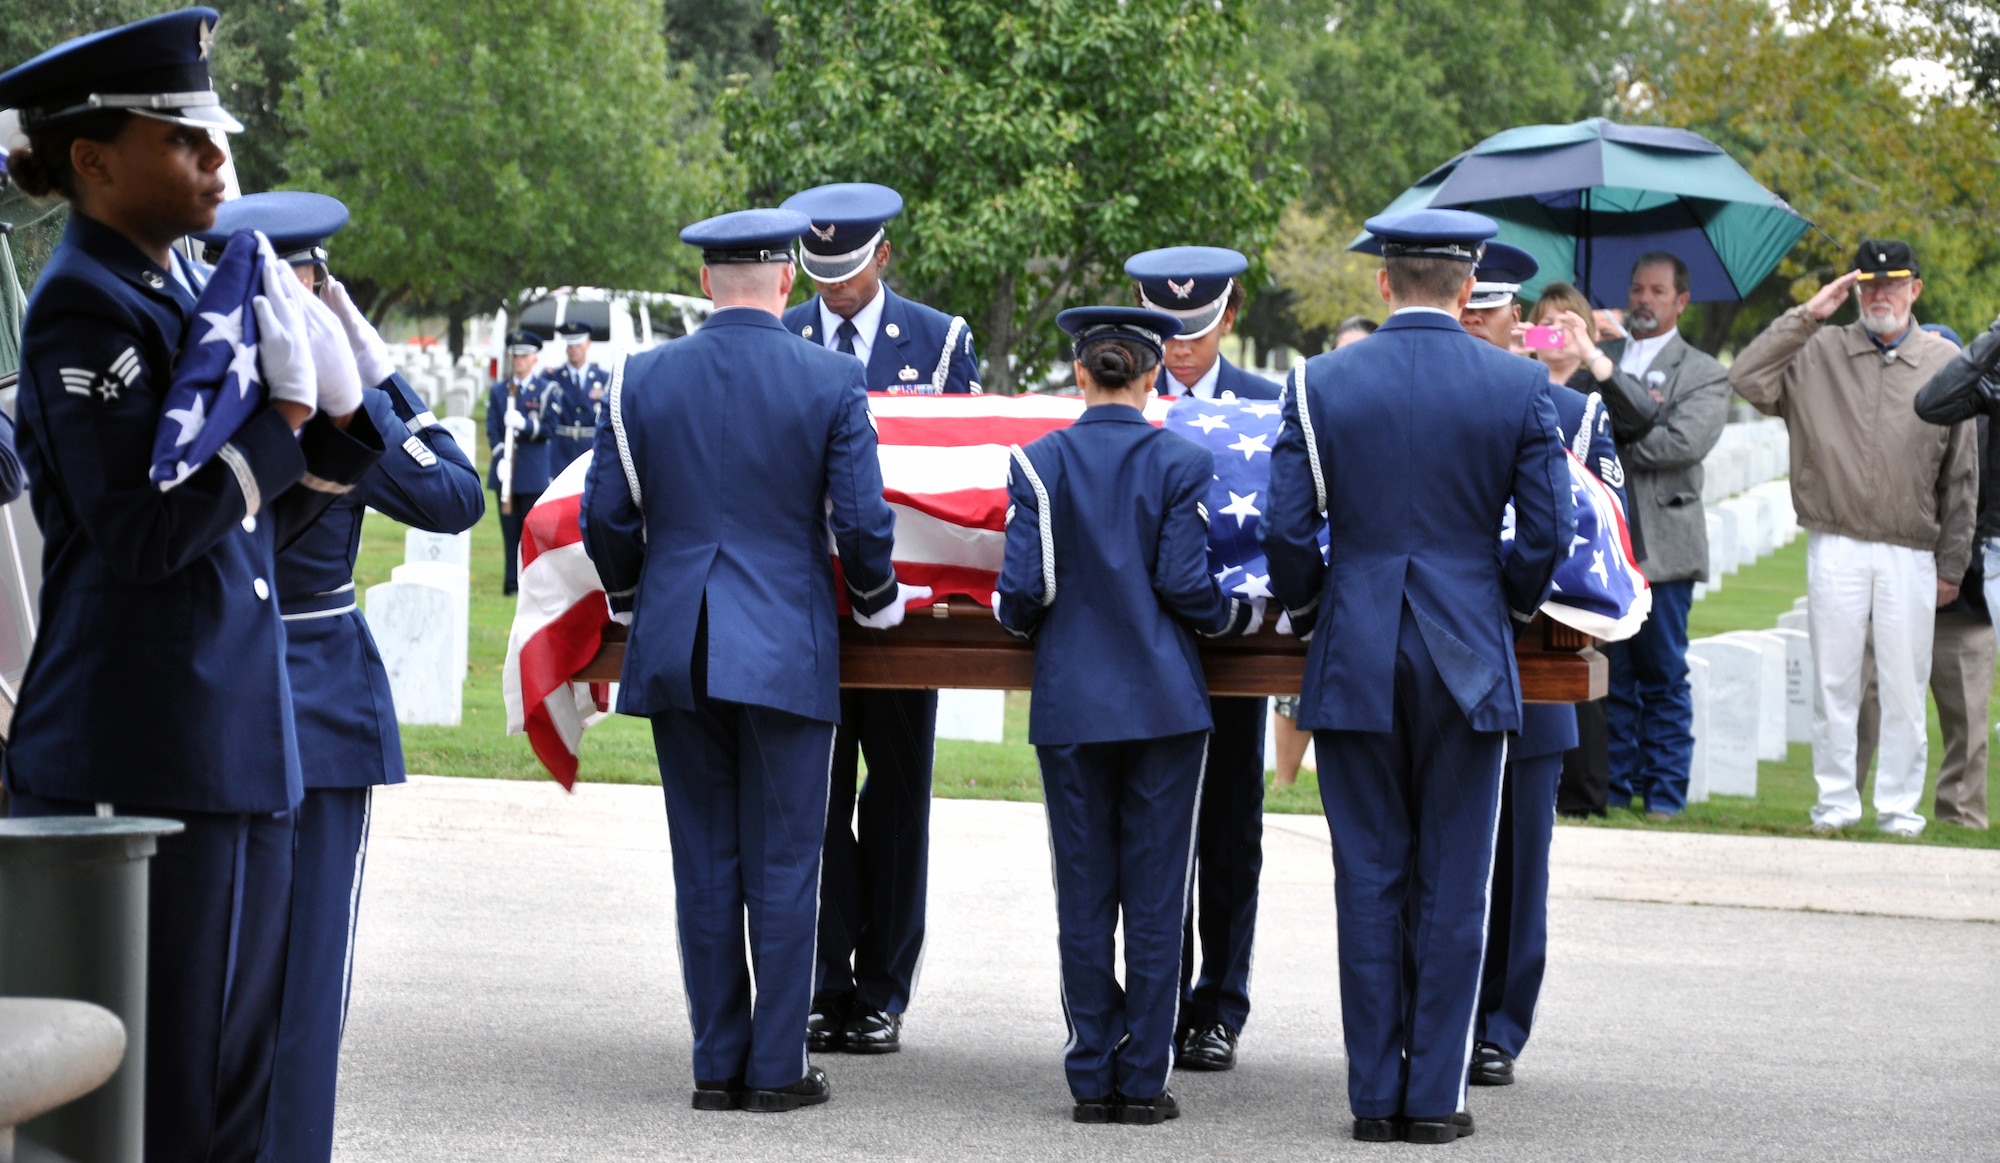 An Air Commando who died when his C-123 flare ship was shot down over Ahn Khe, Vietnam, was laid to rest Friday at Fort Sam Houston National Cemetery, Texas.
The 310th Air Commando Squadron loadmaster, Airman 1st Class Jerry Mack Wall, 24, was killed when his plane was hit by enemy fire and crashed into the central highlands, May 18, 1966.  Until recently Wall was listed as Missing in Action.  (U.S. Air Force photo by Steven Elliott)
